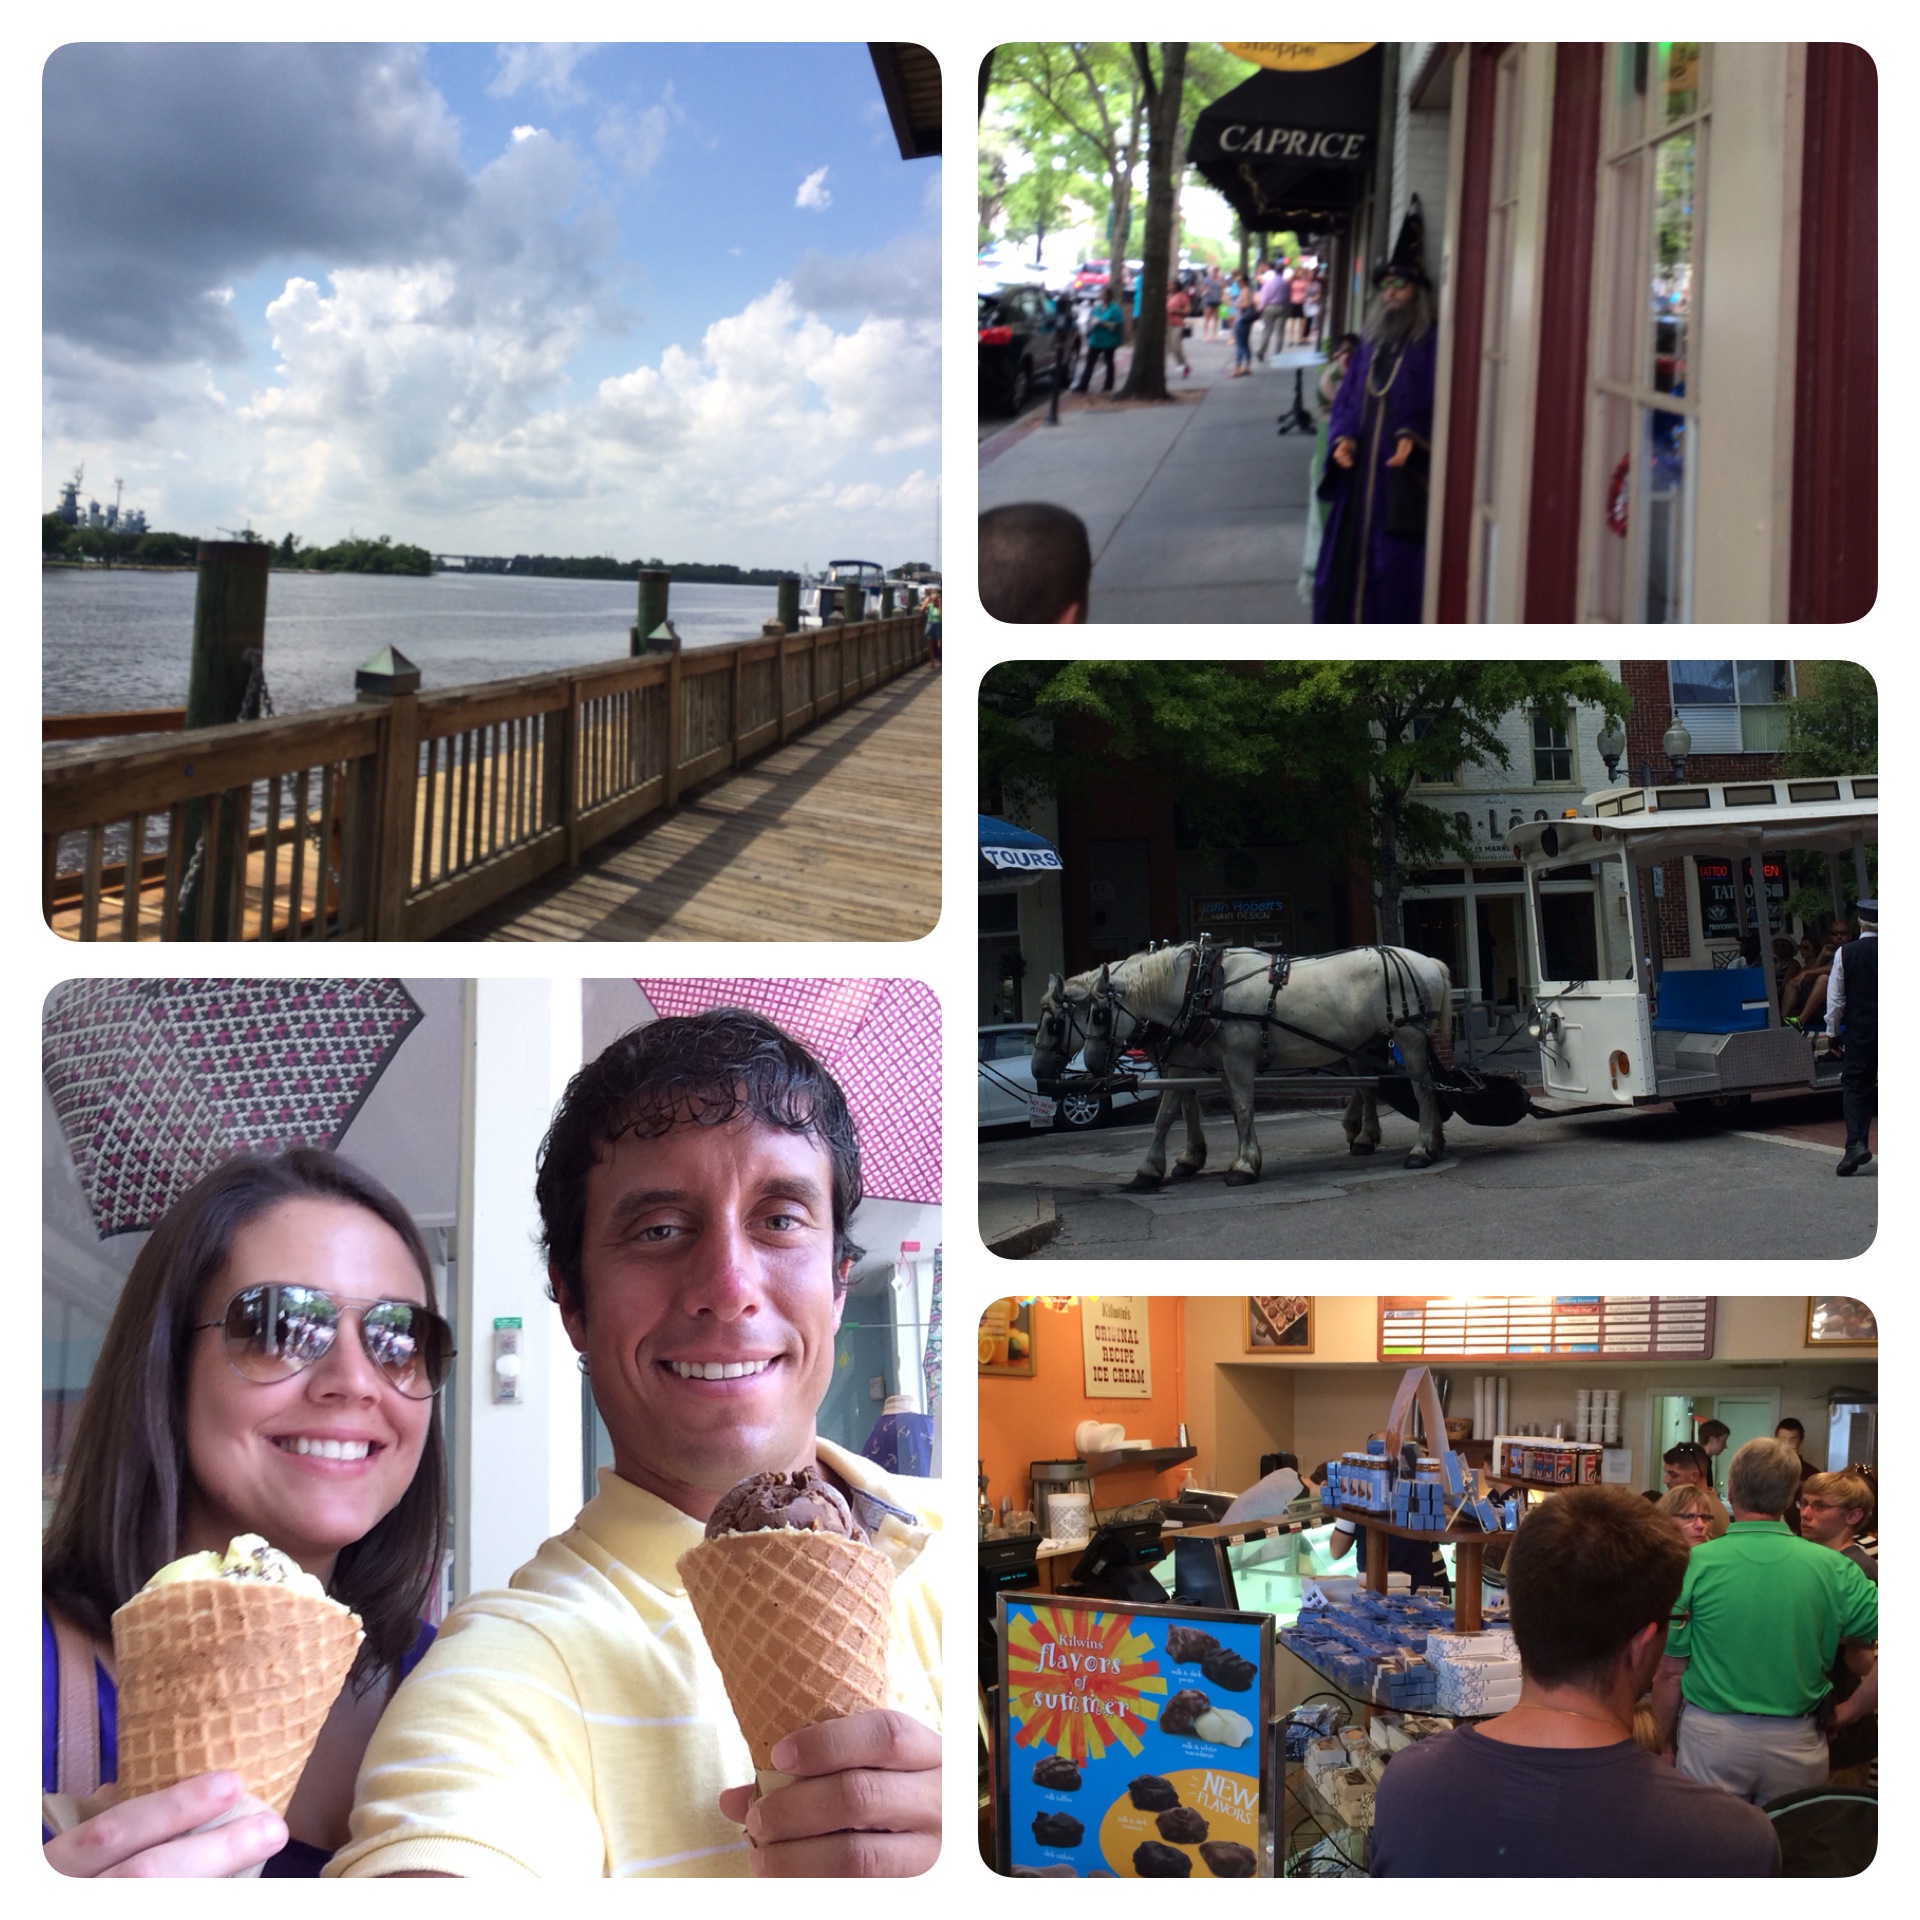 Clockwise: A real life wizard outside the magic store, the horsedrawn carriage, inside Kilwin's, Sid and I with our ice cream, and a view of the water walkway.